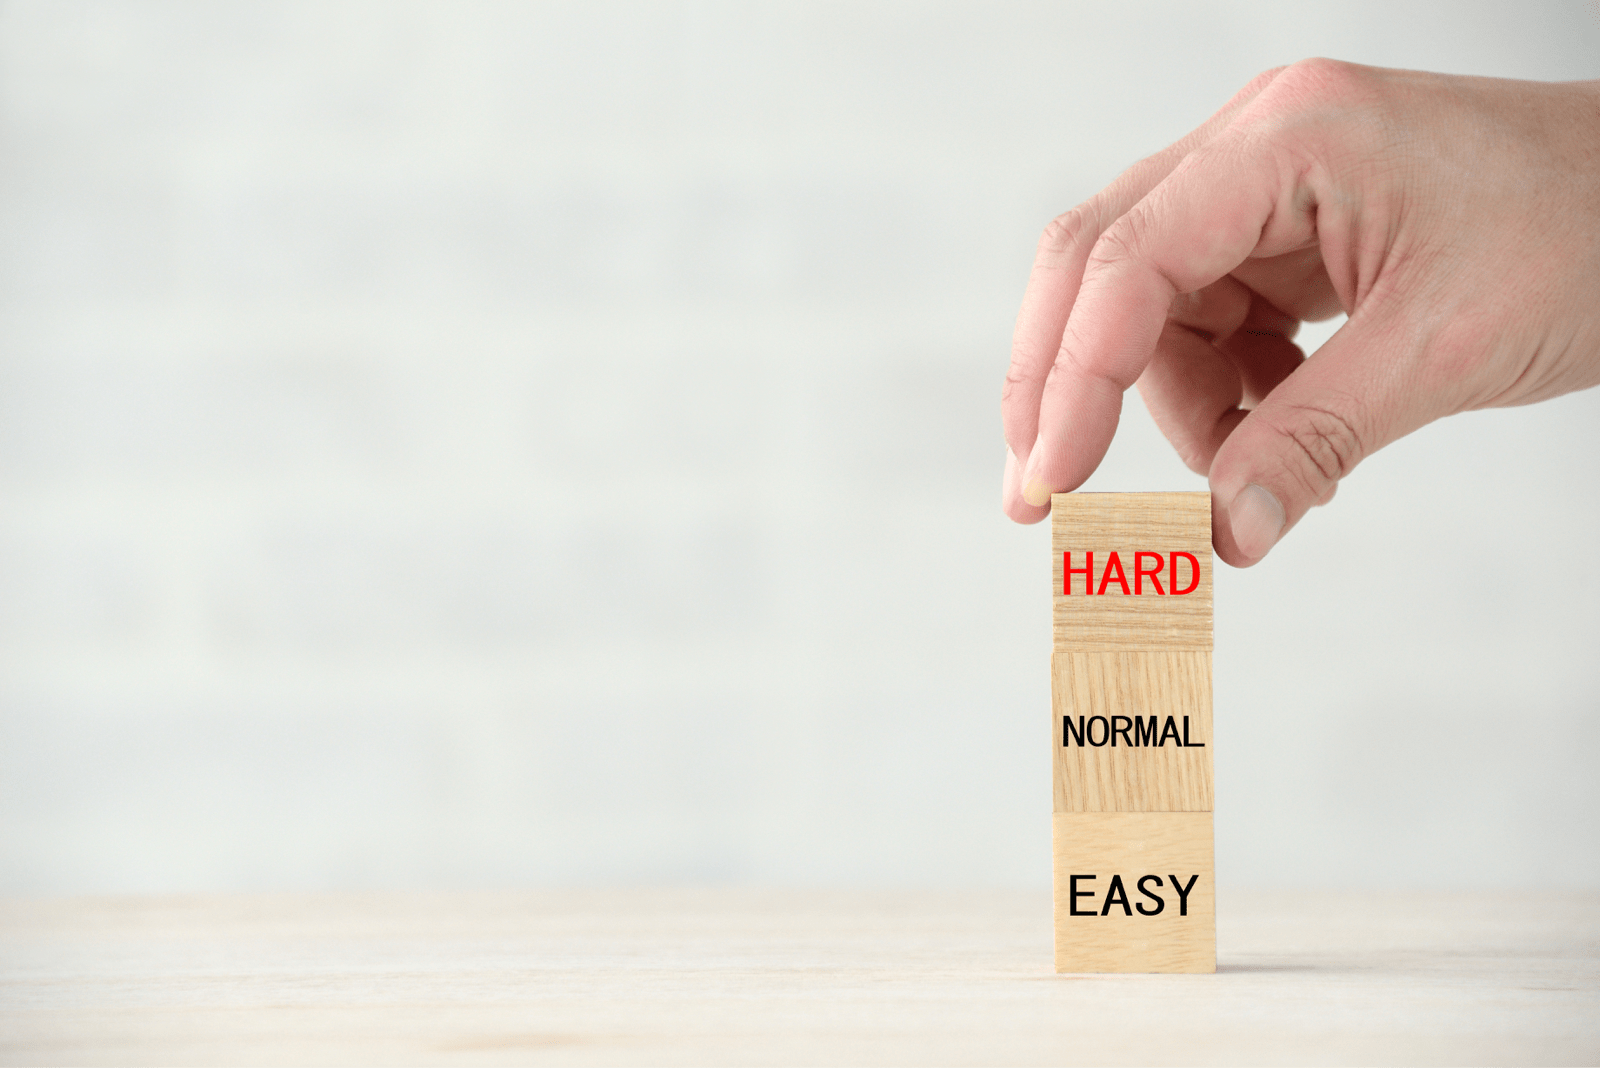 HARD、NORMAL、EASYとブロックが積まれている様子